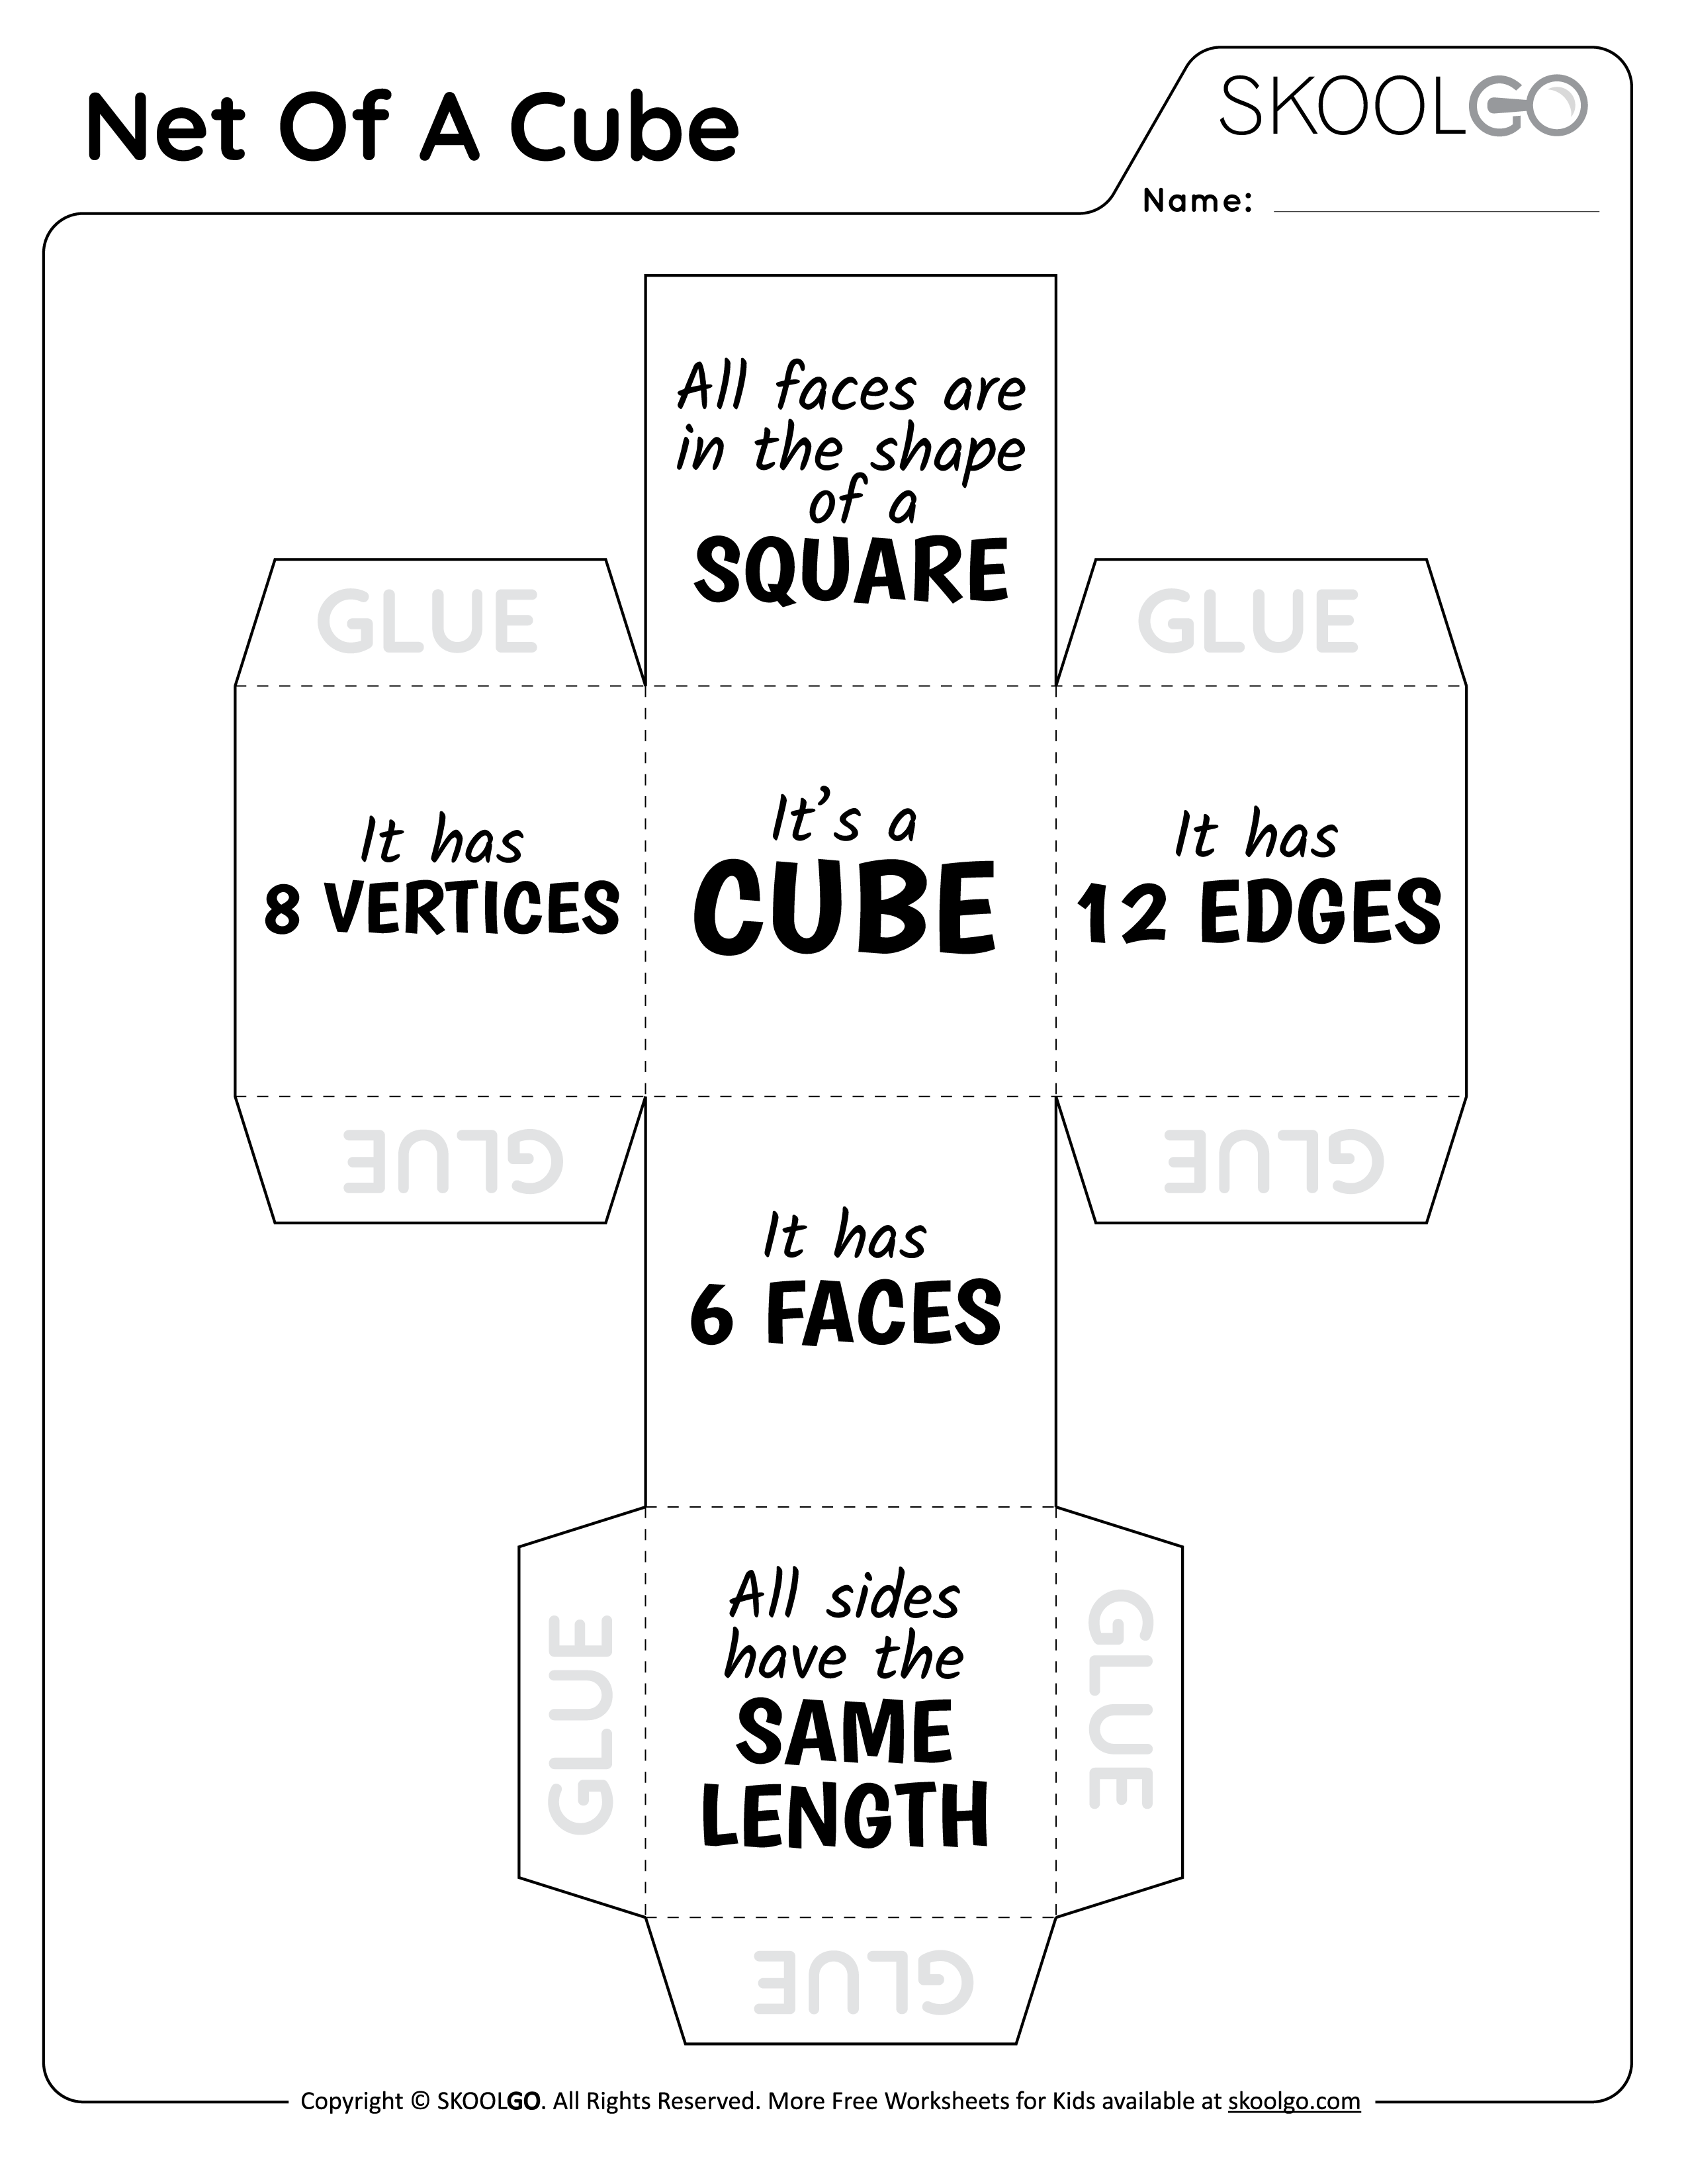 Net Of A Cube - Free Worksheet for Kids - Black and White